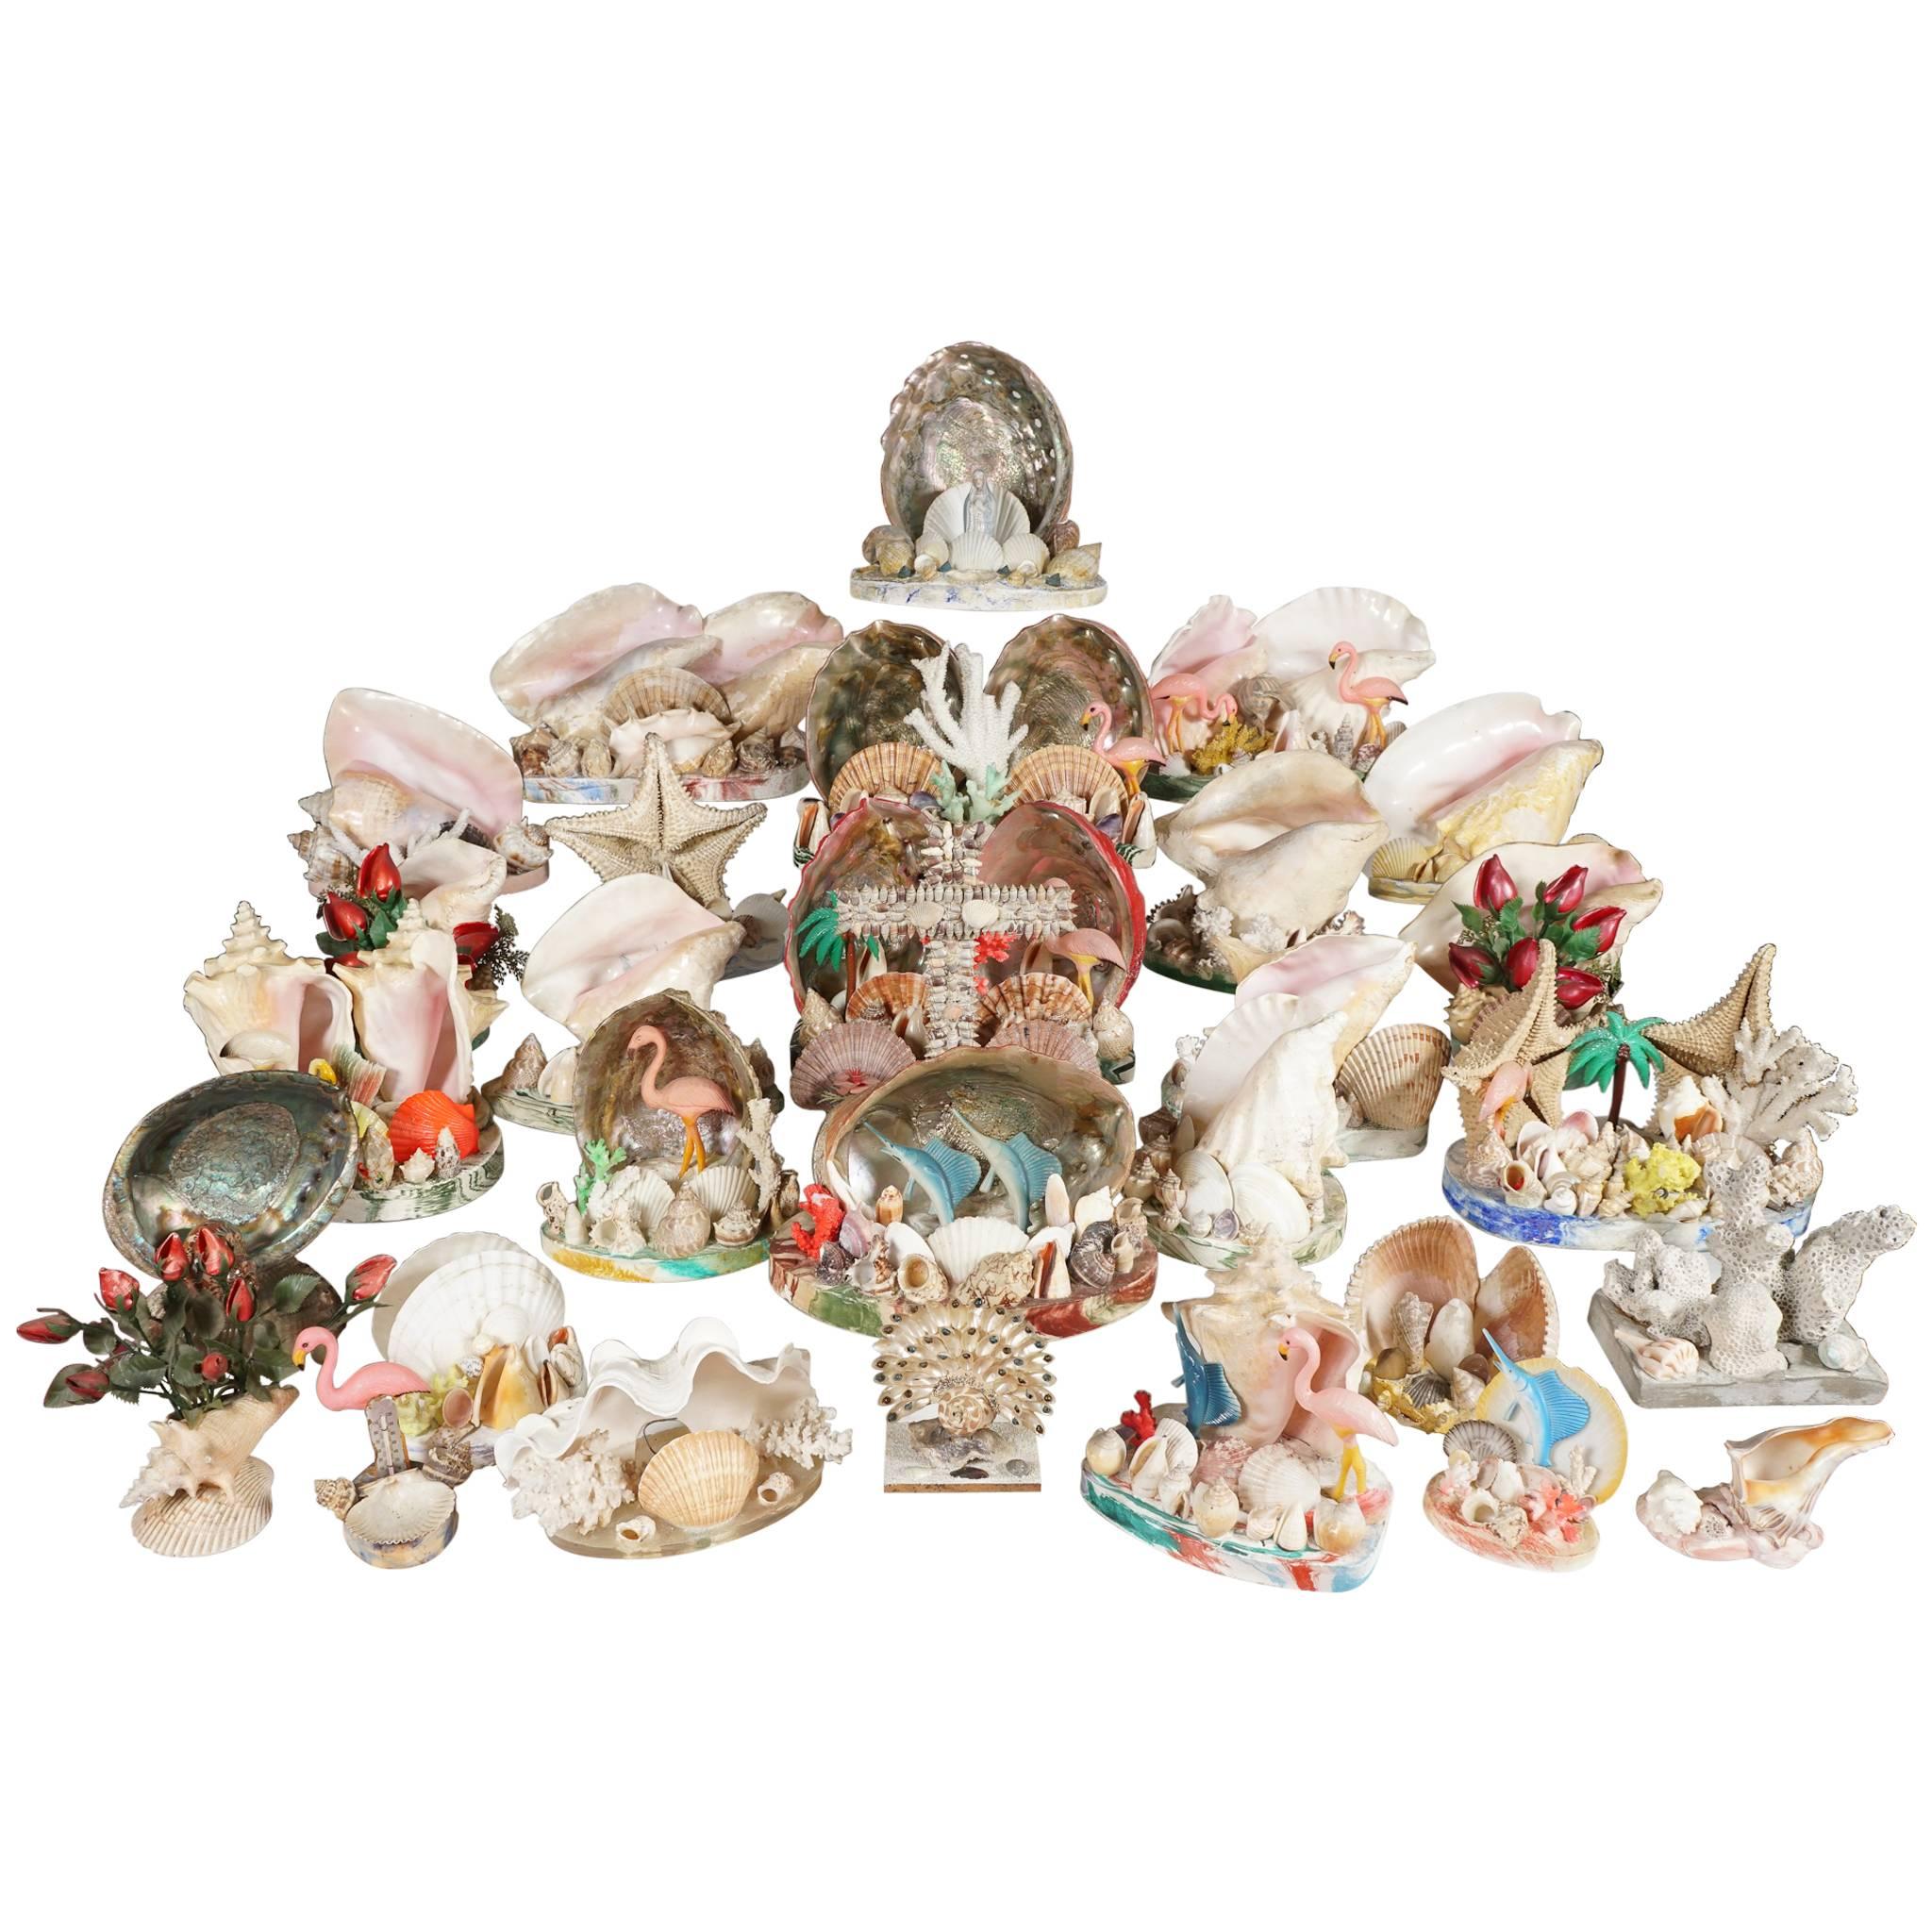 Collection of 30 Vintage Shell, Coral and Plastic Sea Side Souvenir Sculptures